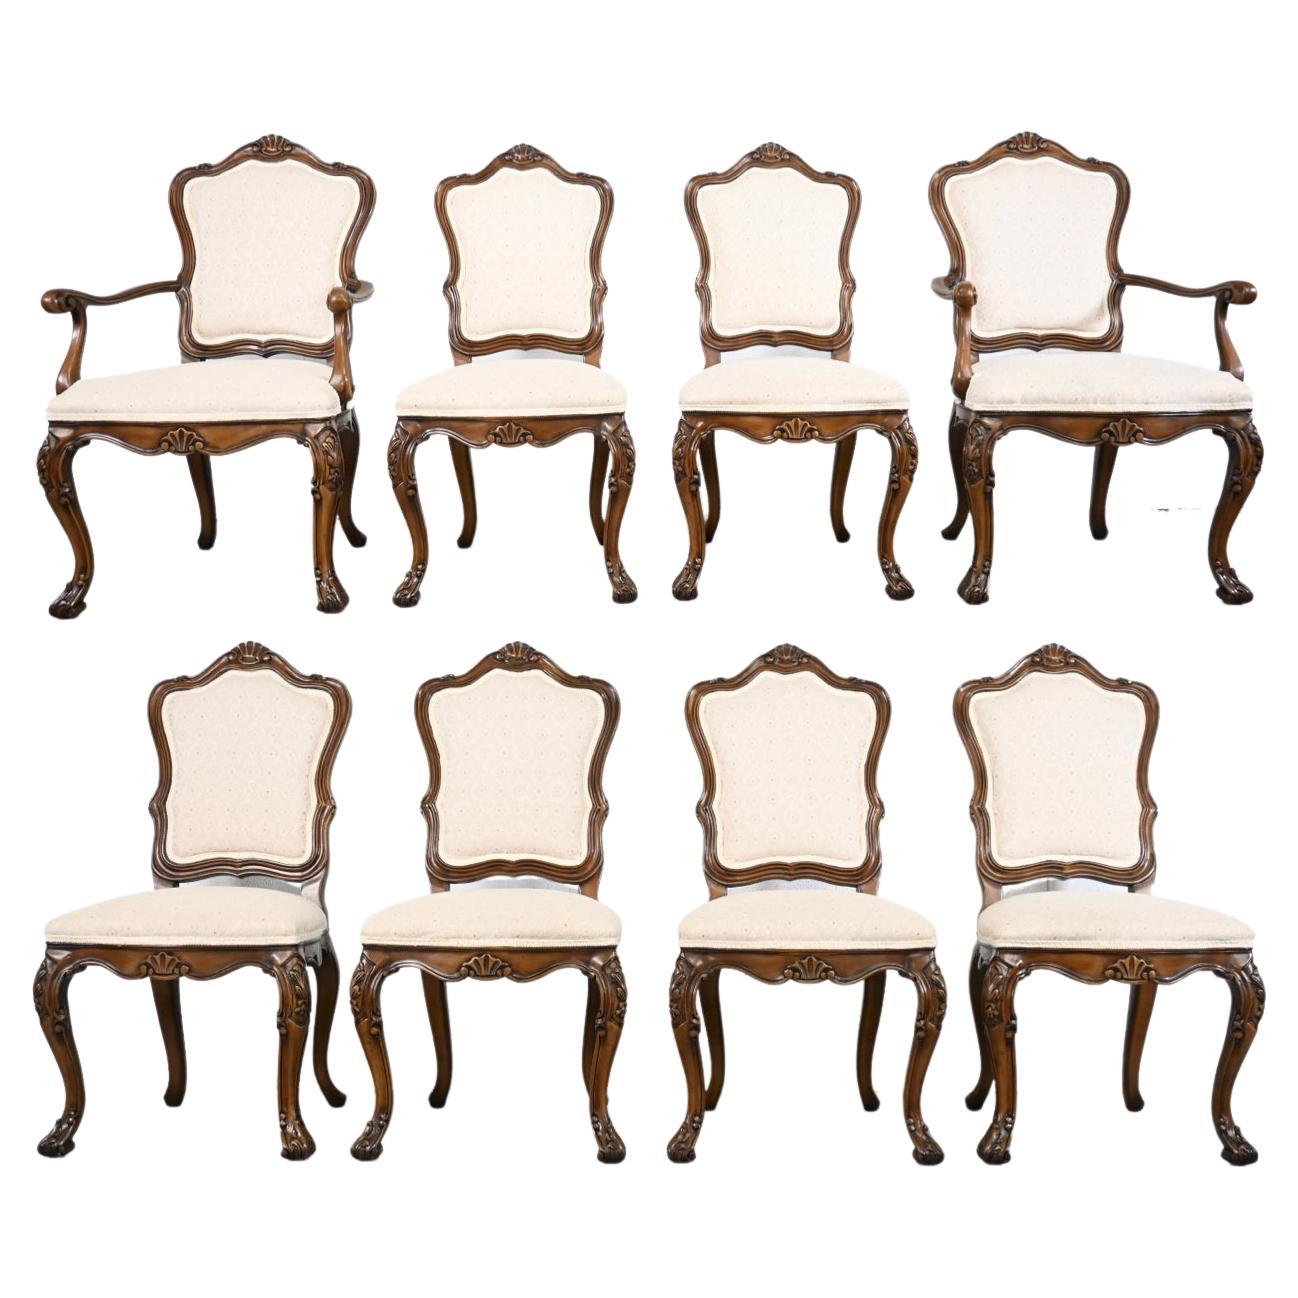 Karges Furniture Louis XV French Provincial Dining Chairs, Set of 8